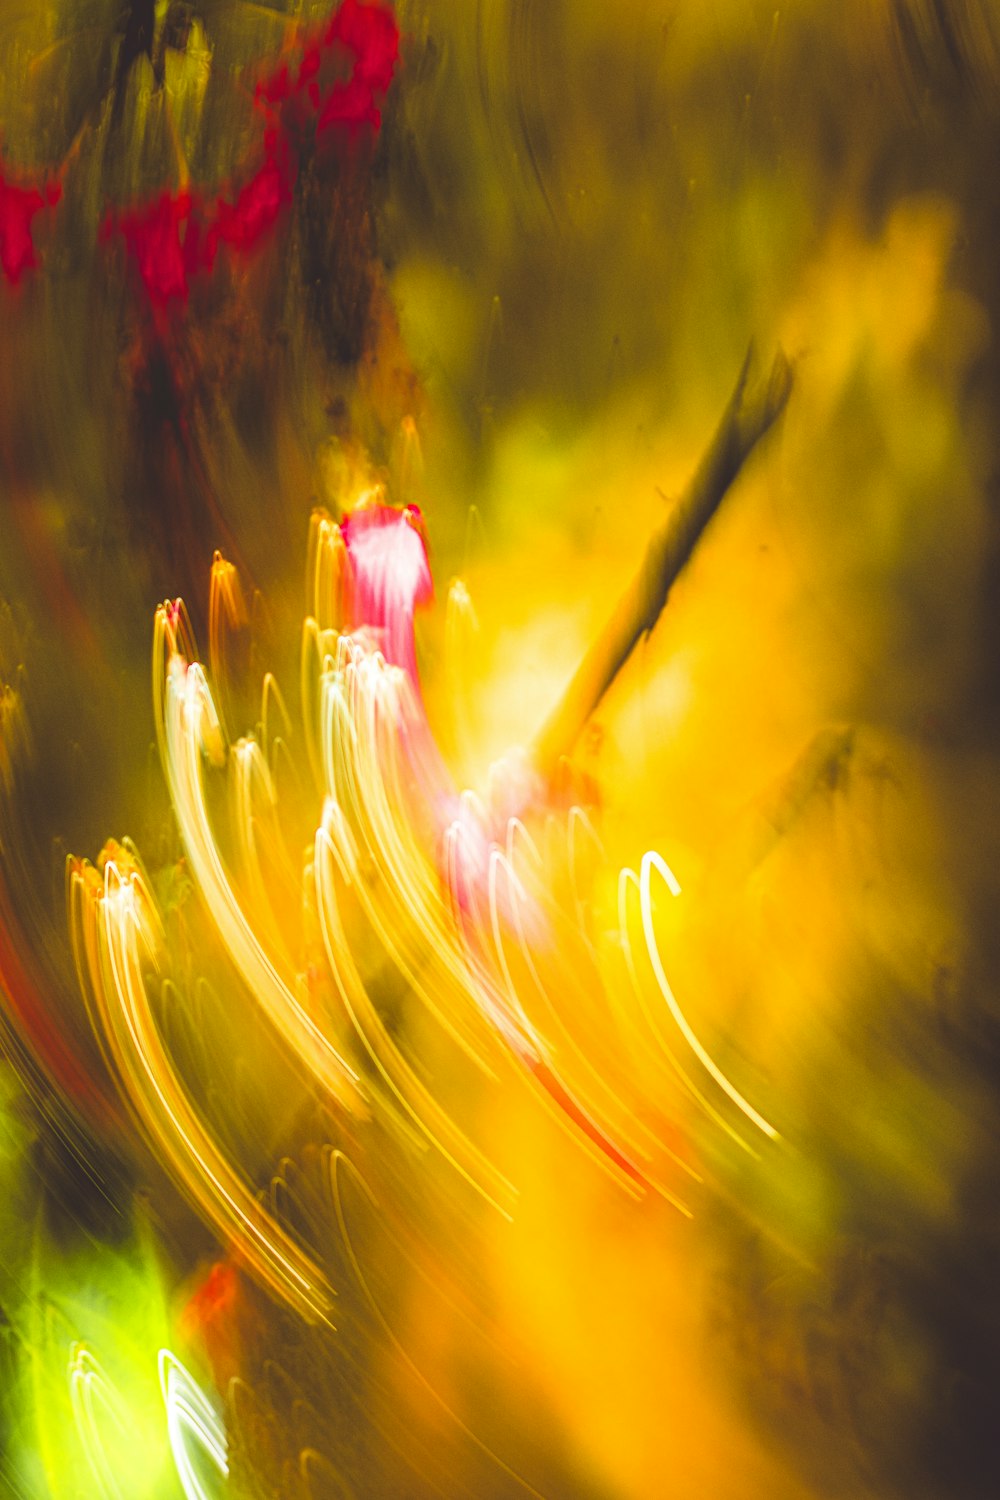 a blurry photo of a flower with red and yellow flowers